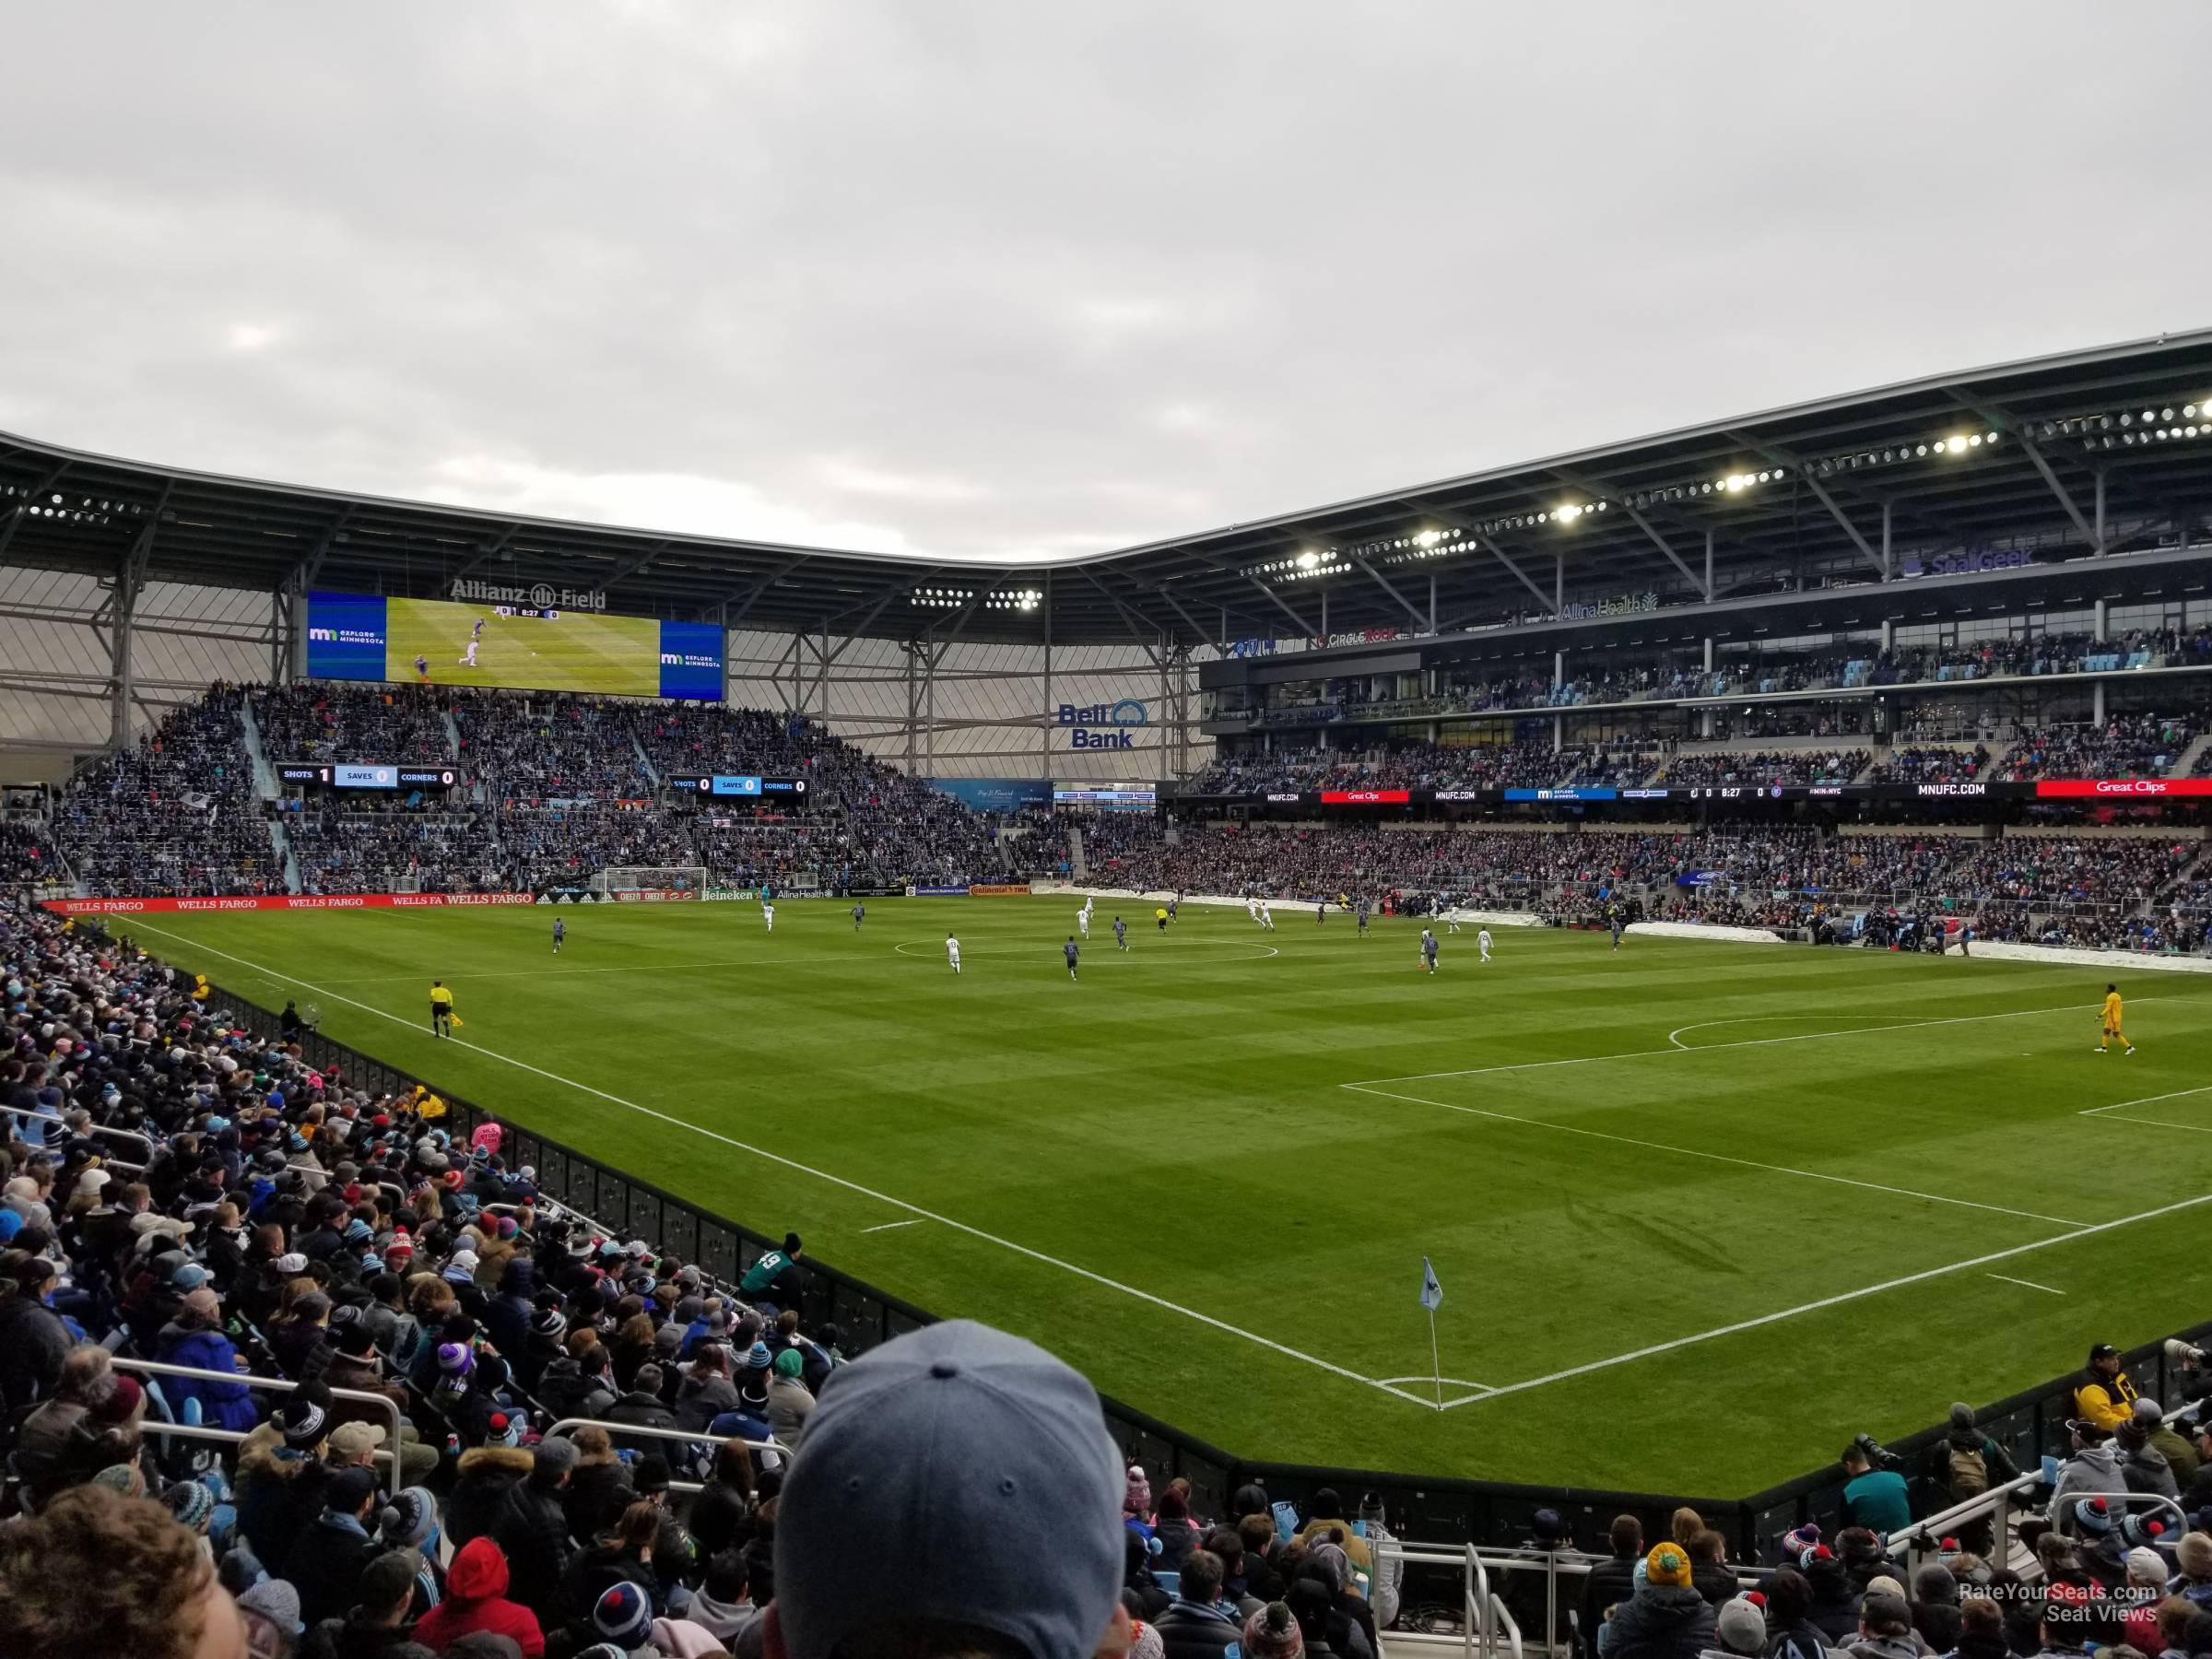 section 8, row 18 seat view  - allianz field